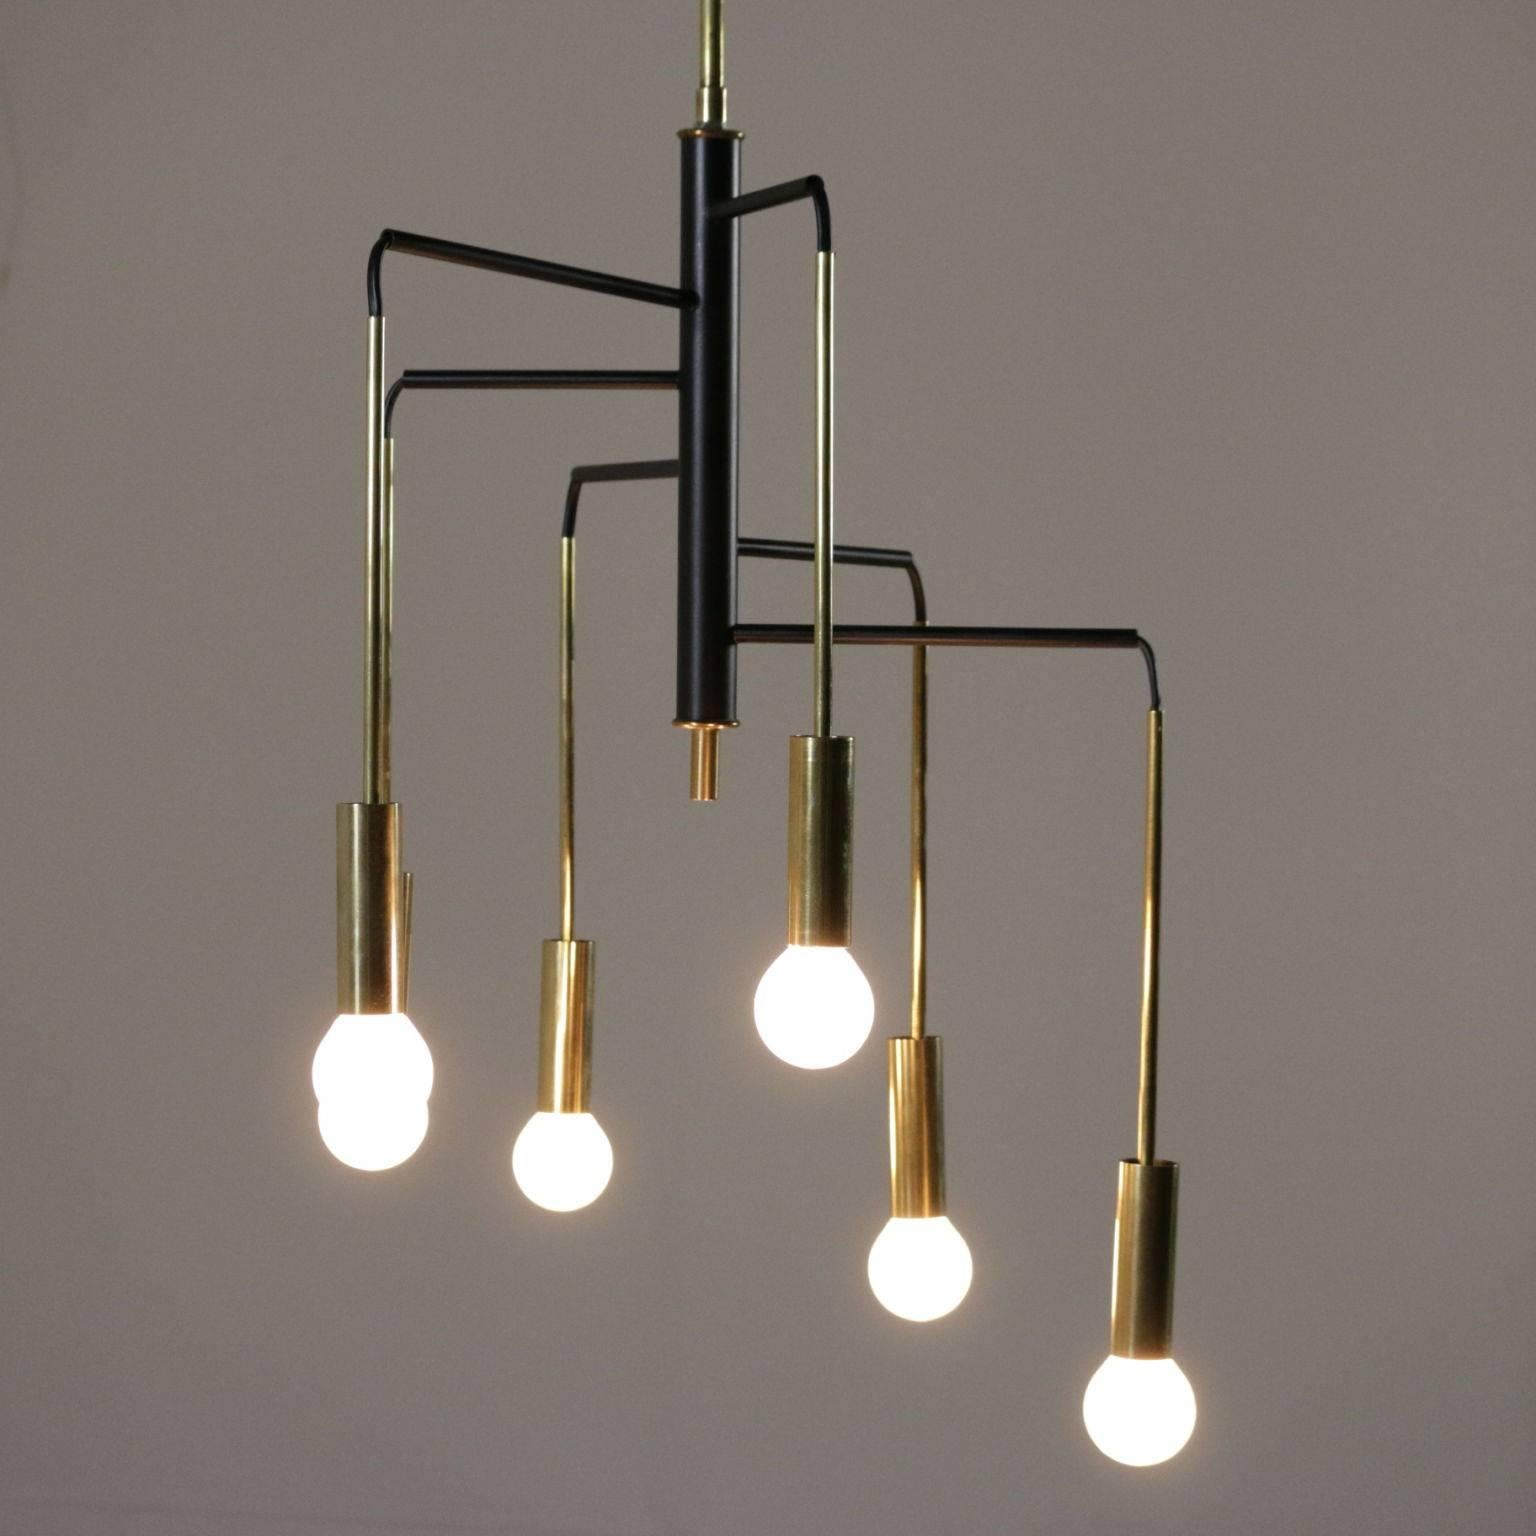 A ceiling lamp, brass and lacquered aluminium. Manufactured in Italy, 1950s-1960s.